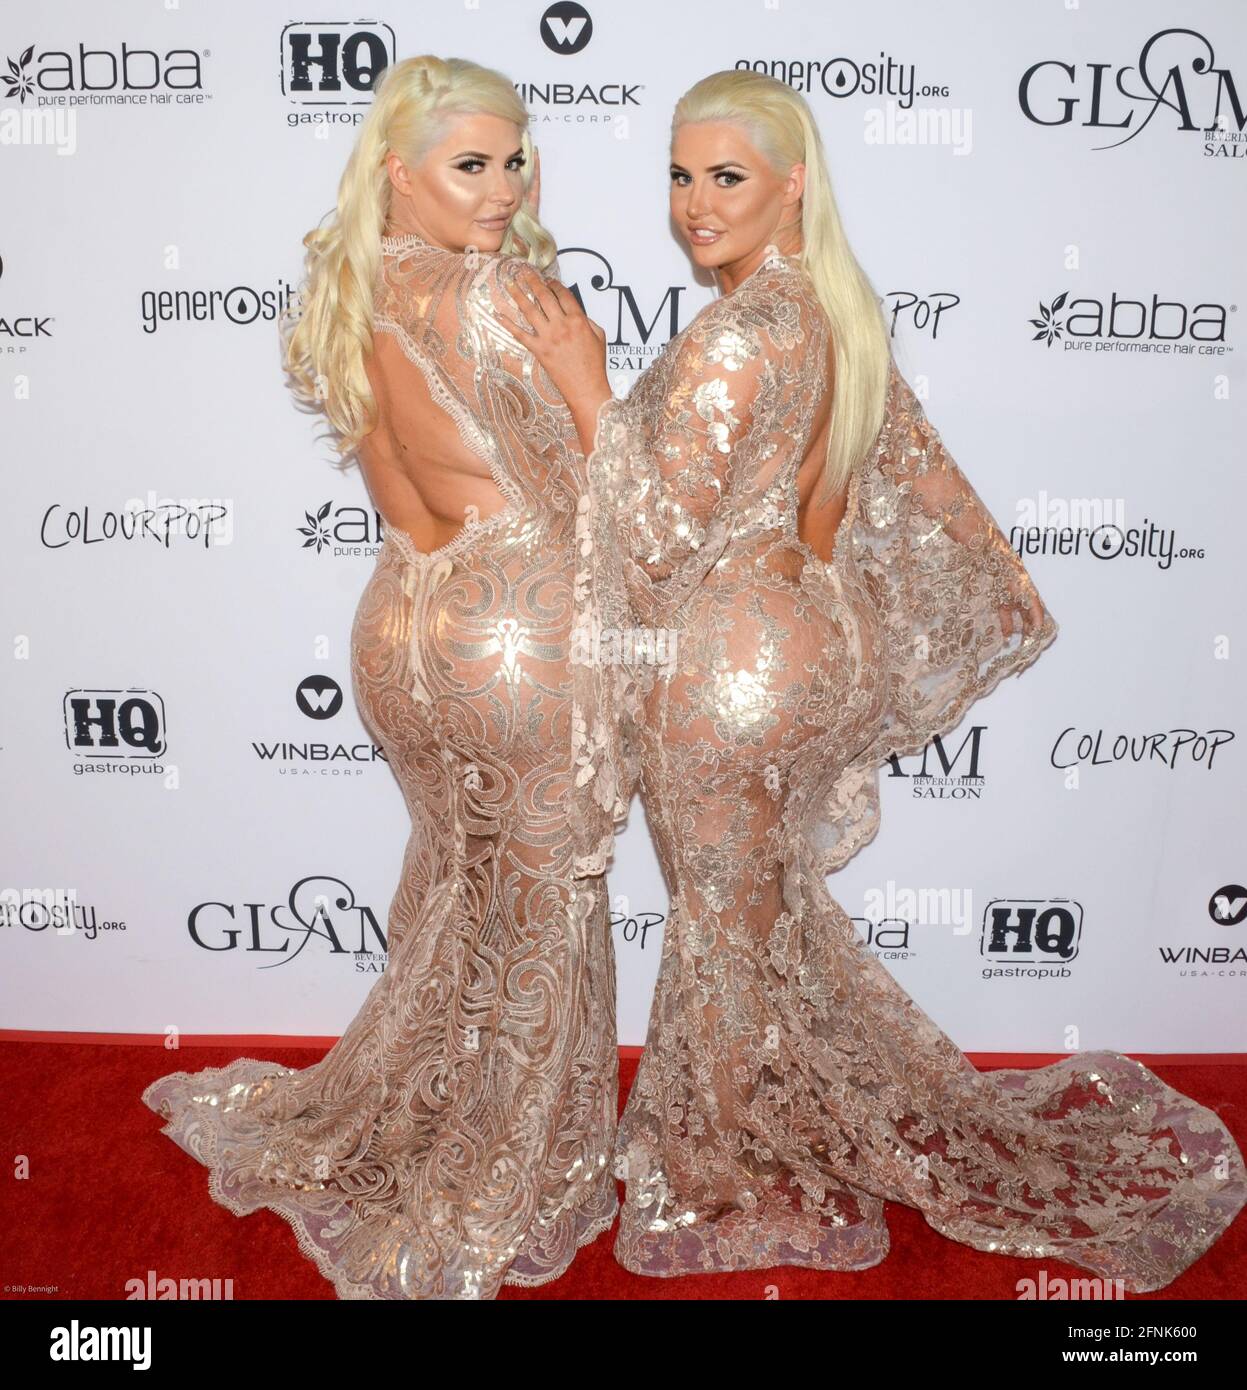 November 19, 2015, Beverly Hills, California, USA: Karissa Shannon and Kristina Shannon attend the GLAM Beverly Hills Salon Grand Opening celebration and Ribbon Cutting ceremony. (Credit Image: © Billy Bennight/ZUMA Wire) Stock Photo